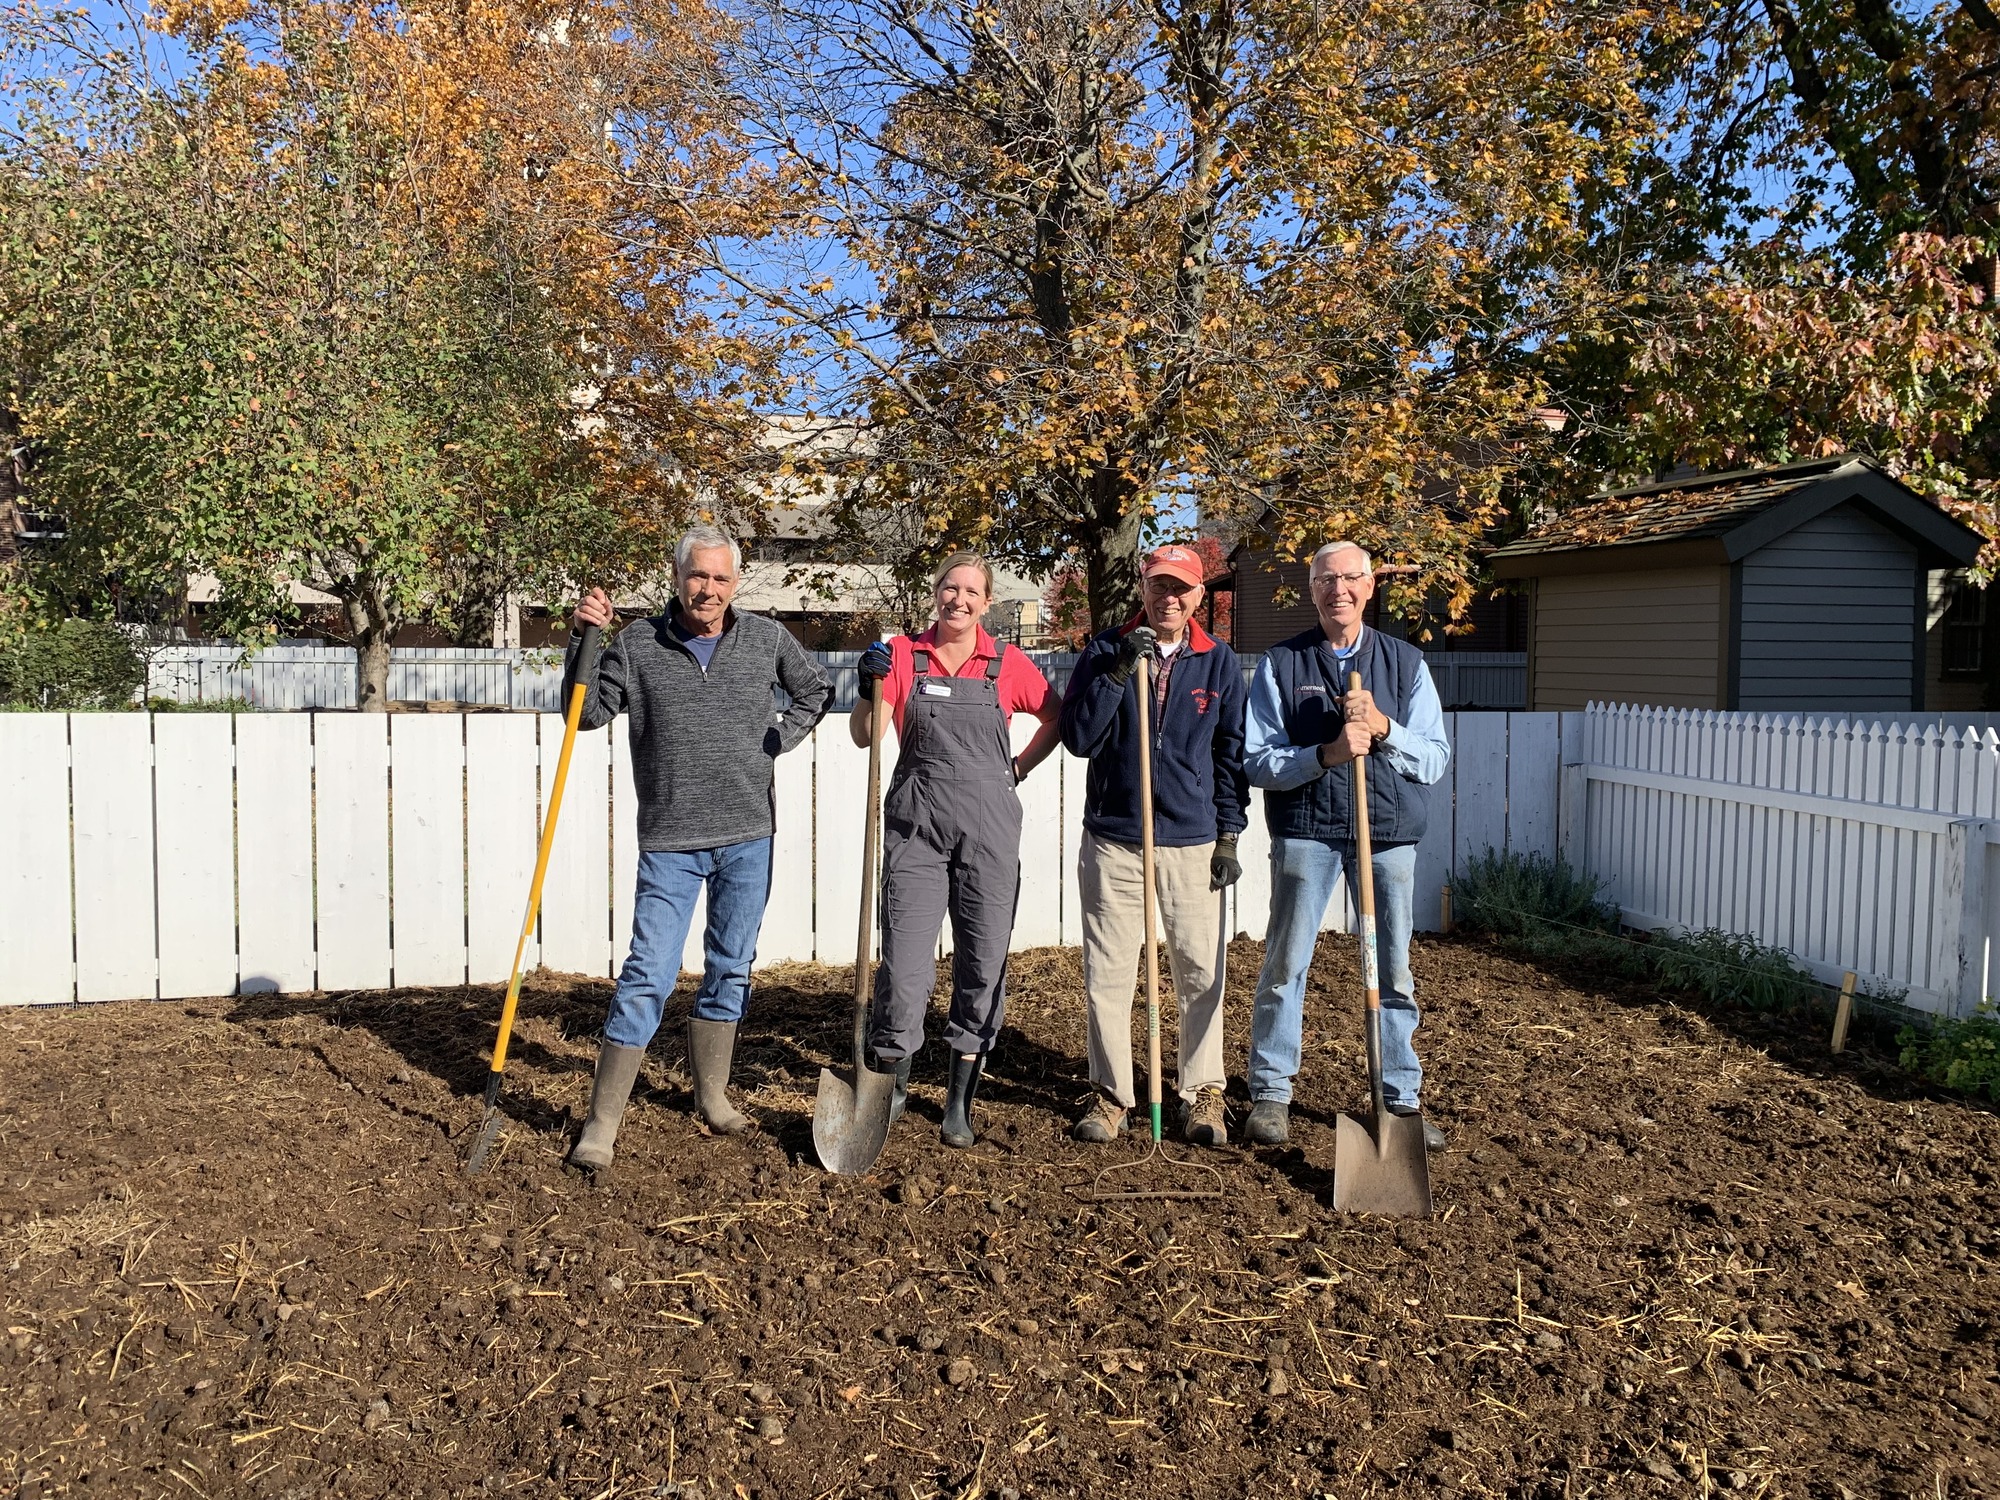 A group of volunteers from the University of Illinois Extension Master Gardener program standing in a garden with shovels.